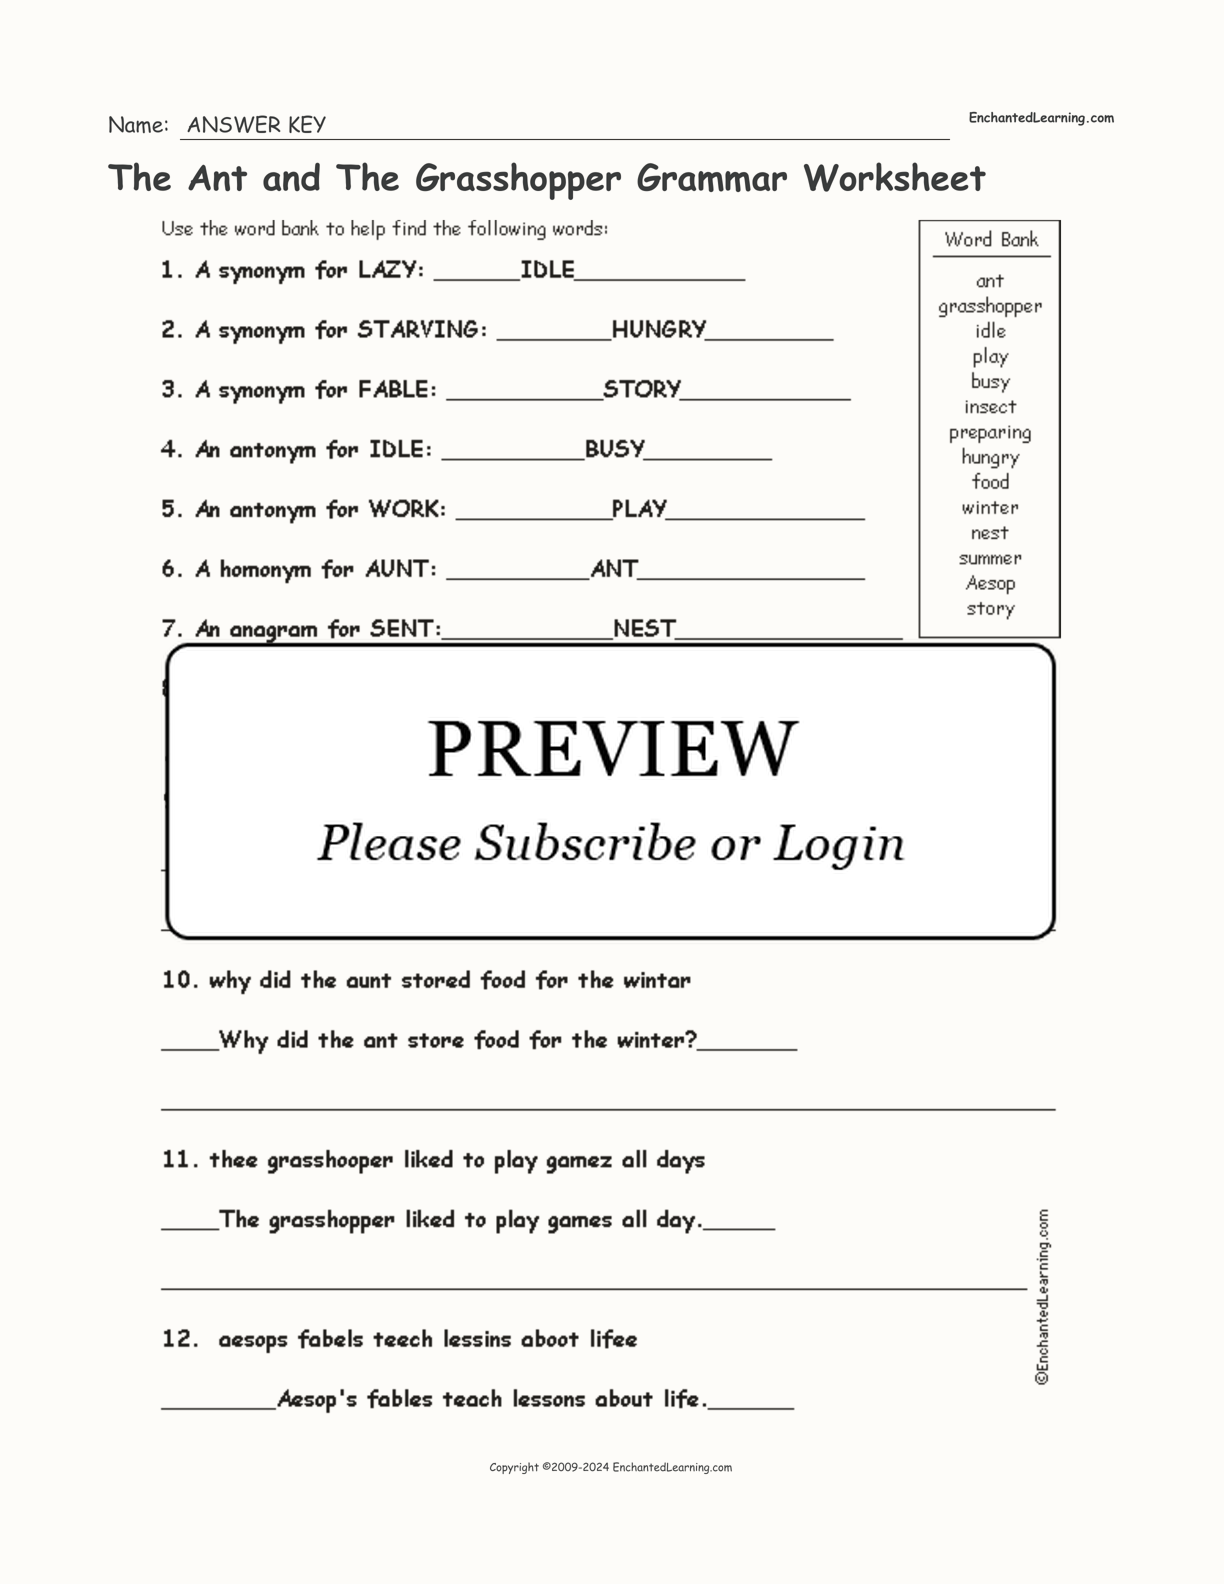 The Ant and The Grasshopper Grammar Worksheet interactive worksheet page 2